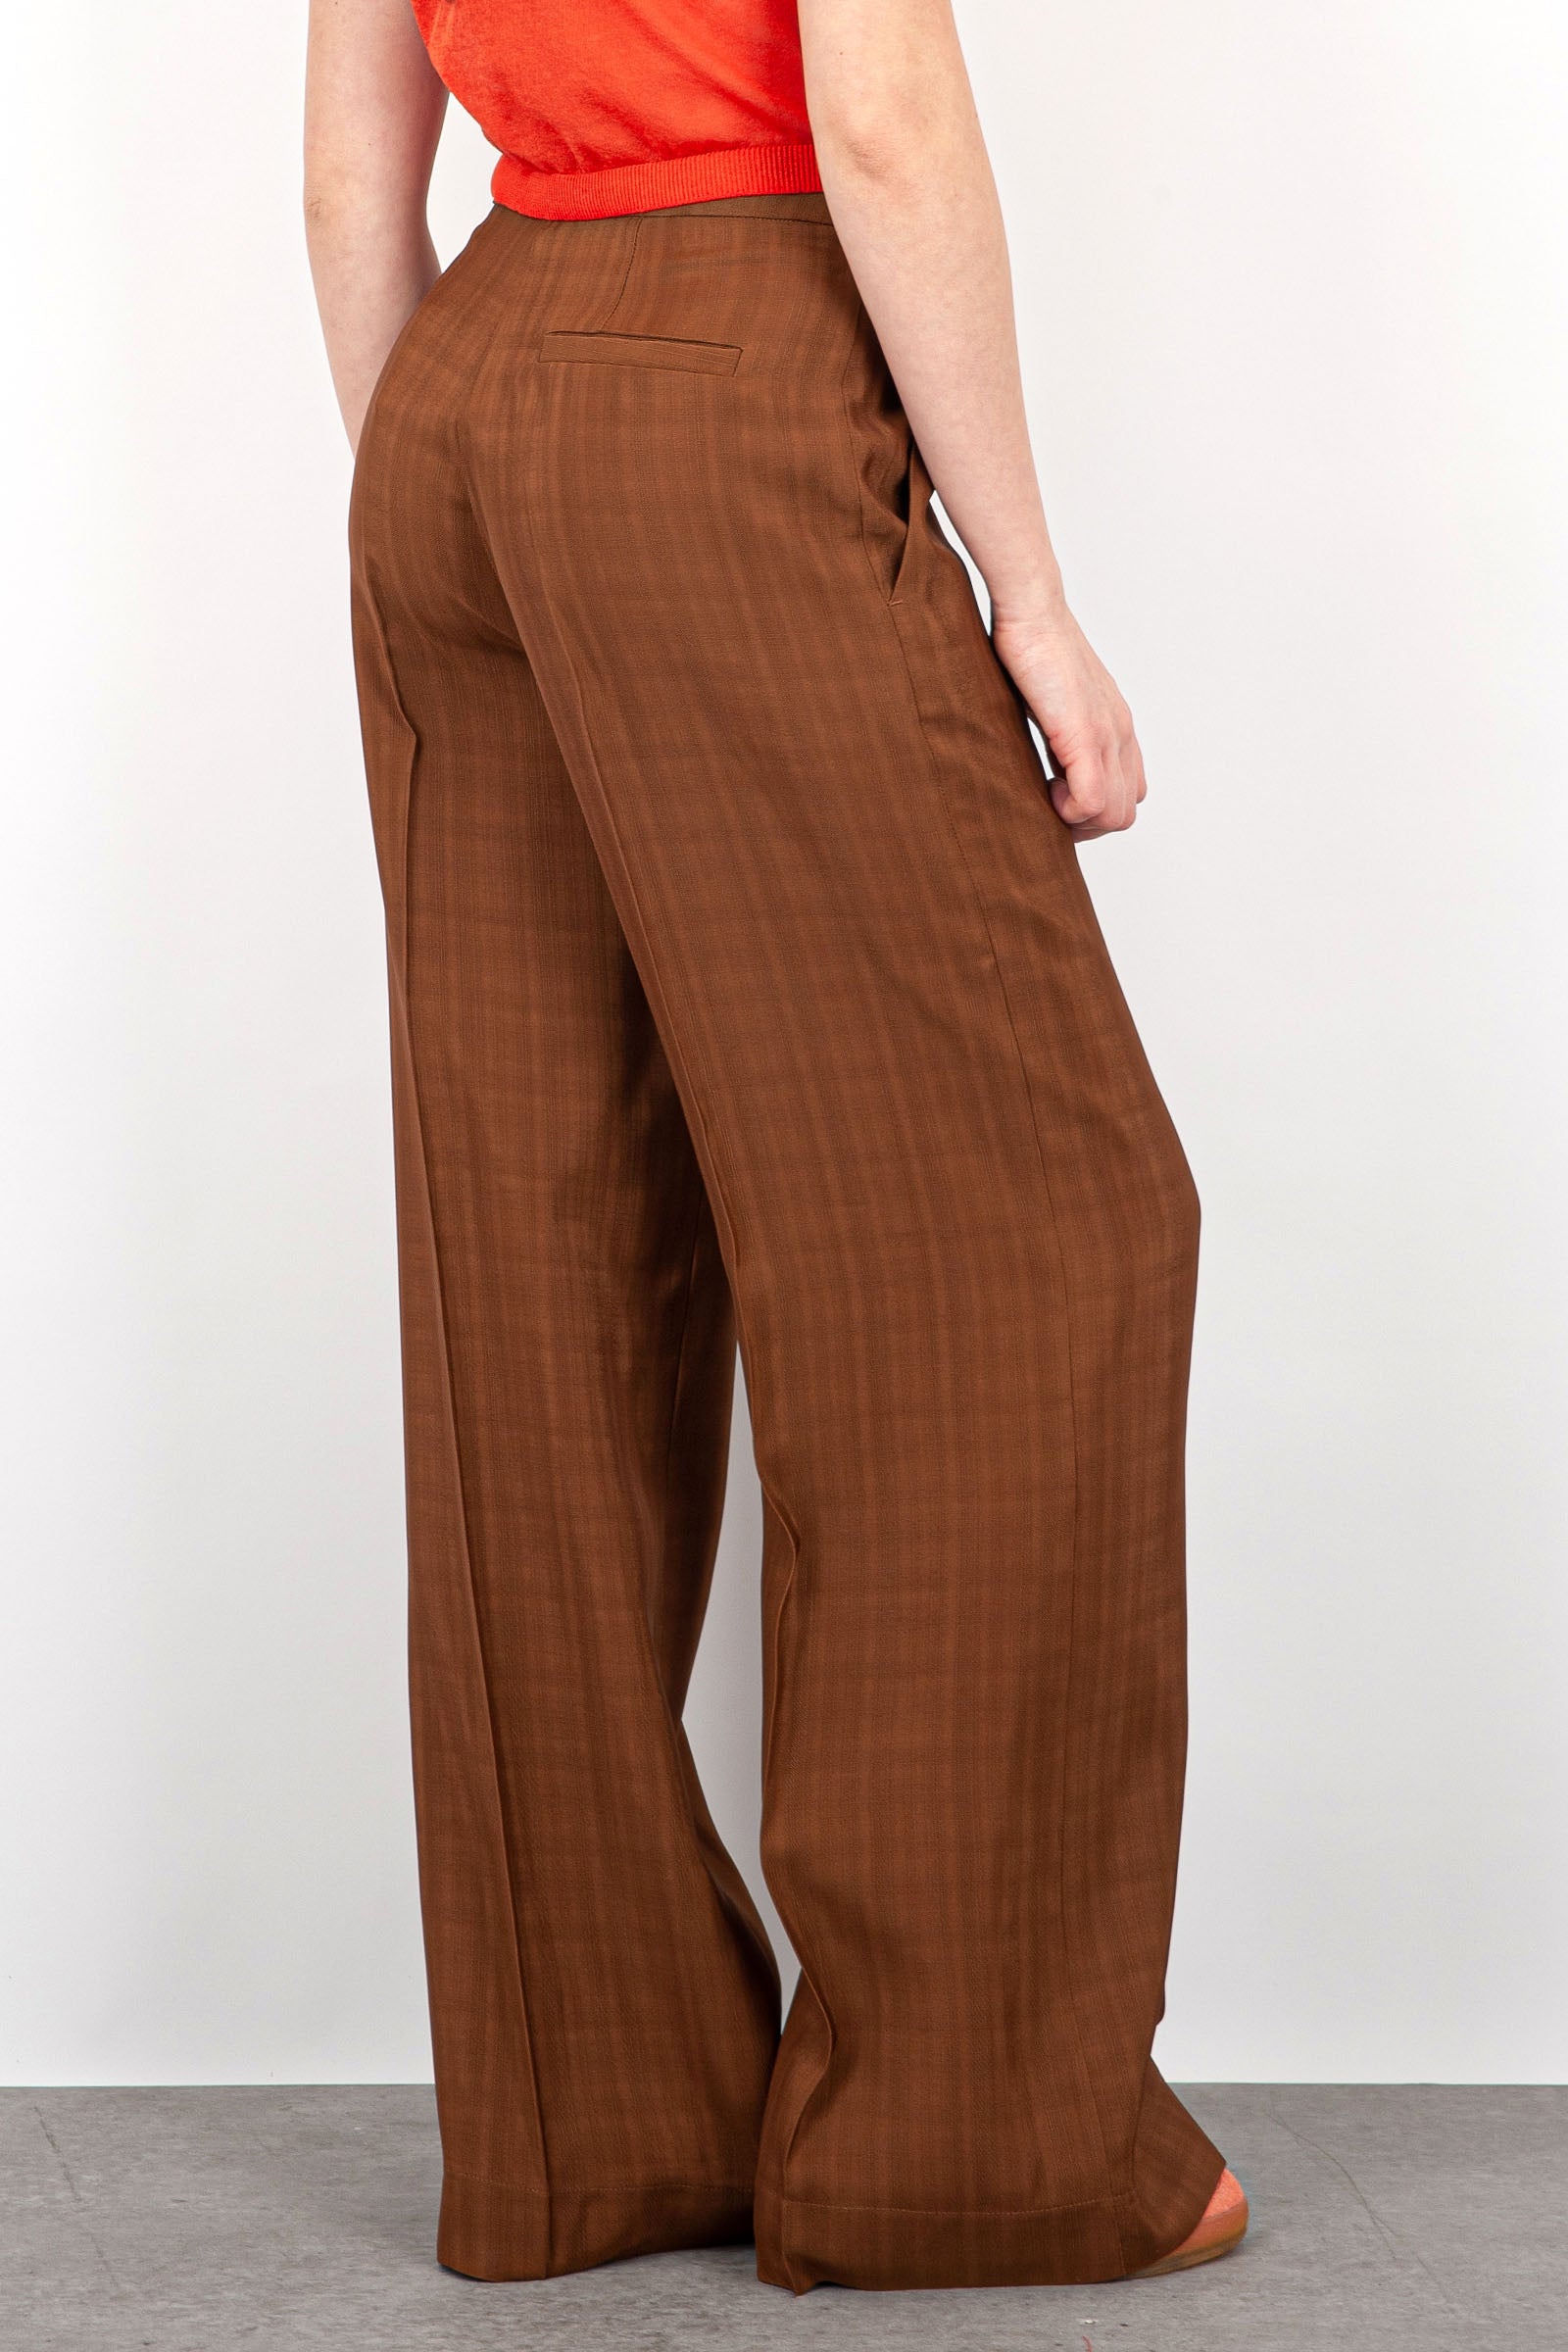 SemiCouture Marlee Synthetic Trousers Tobacco - 5